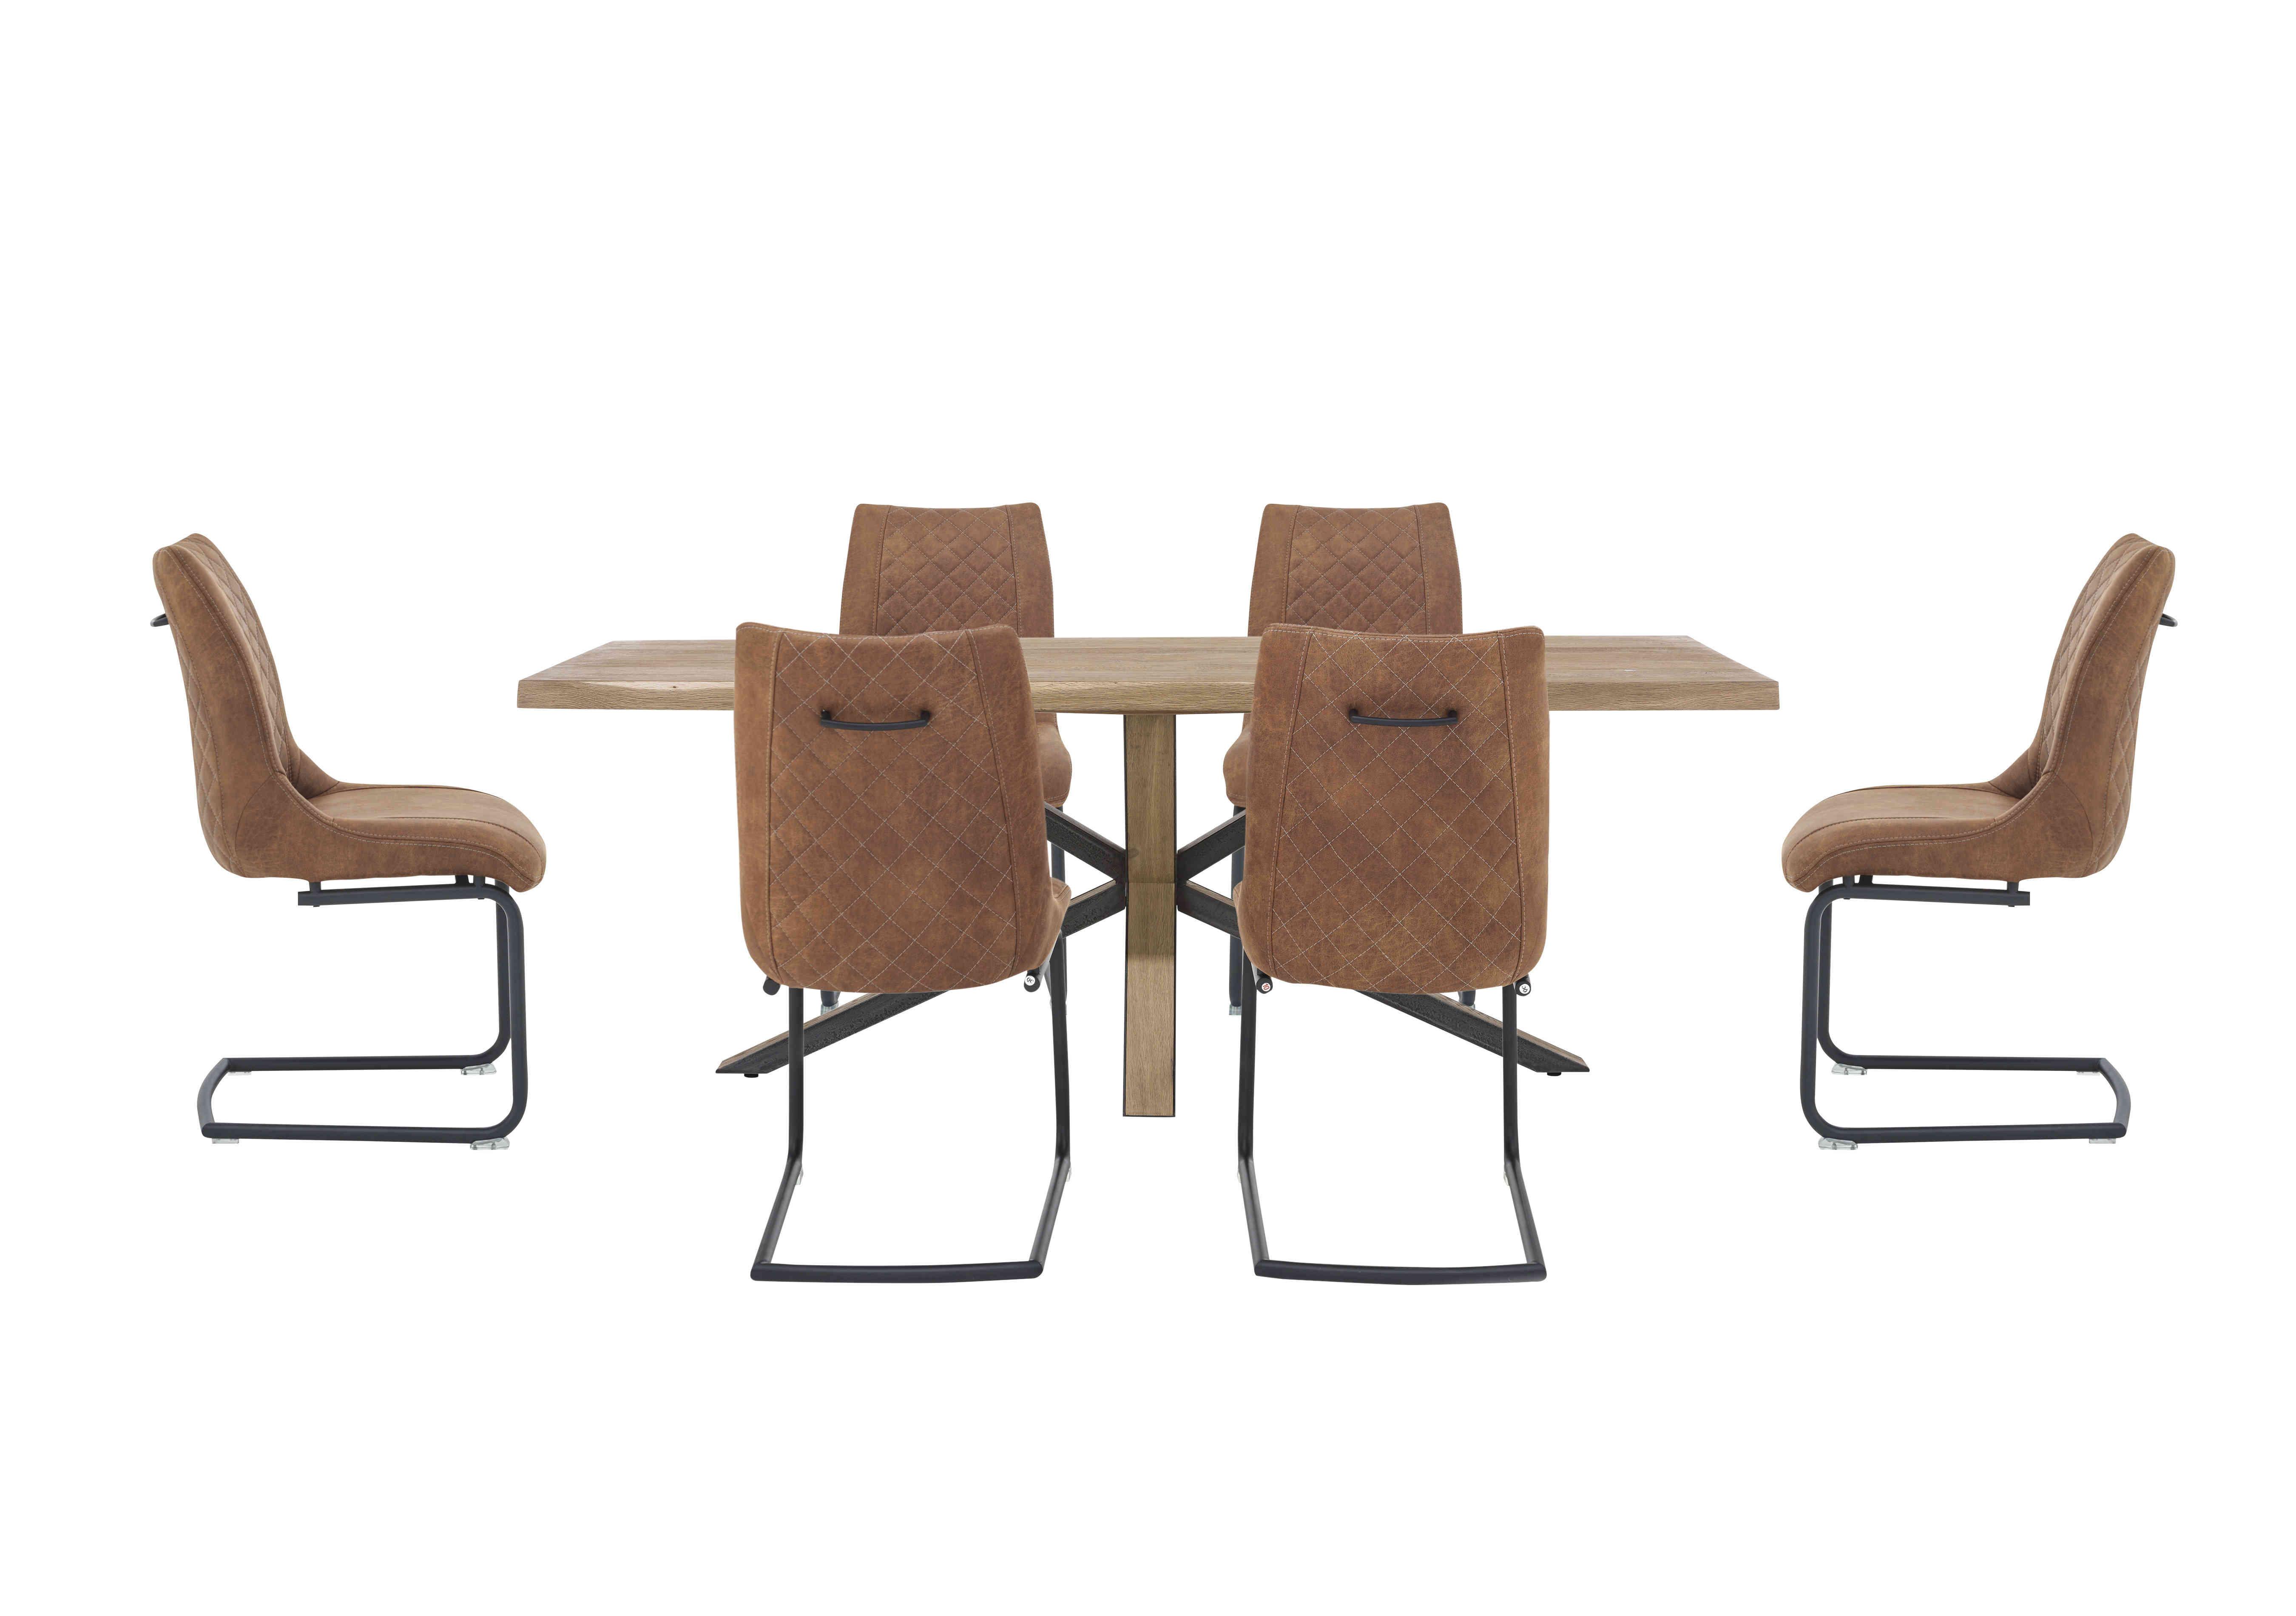 Detroit Starburst Leg Dining Table and 6 Baltimore Dining Chairs Dining Set in Cognac on Furniture Village